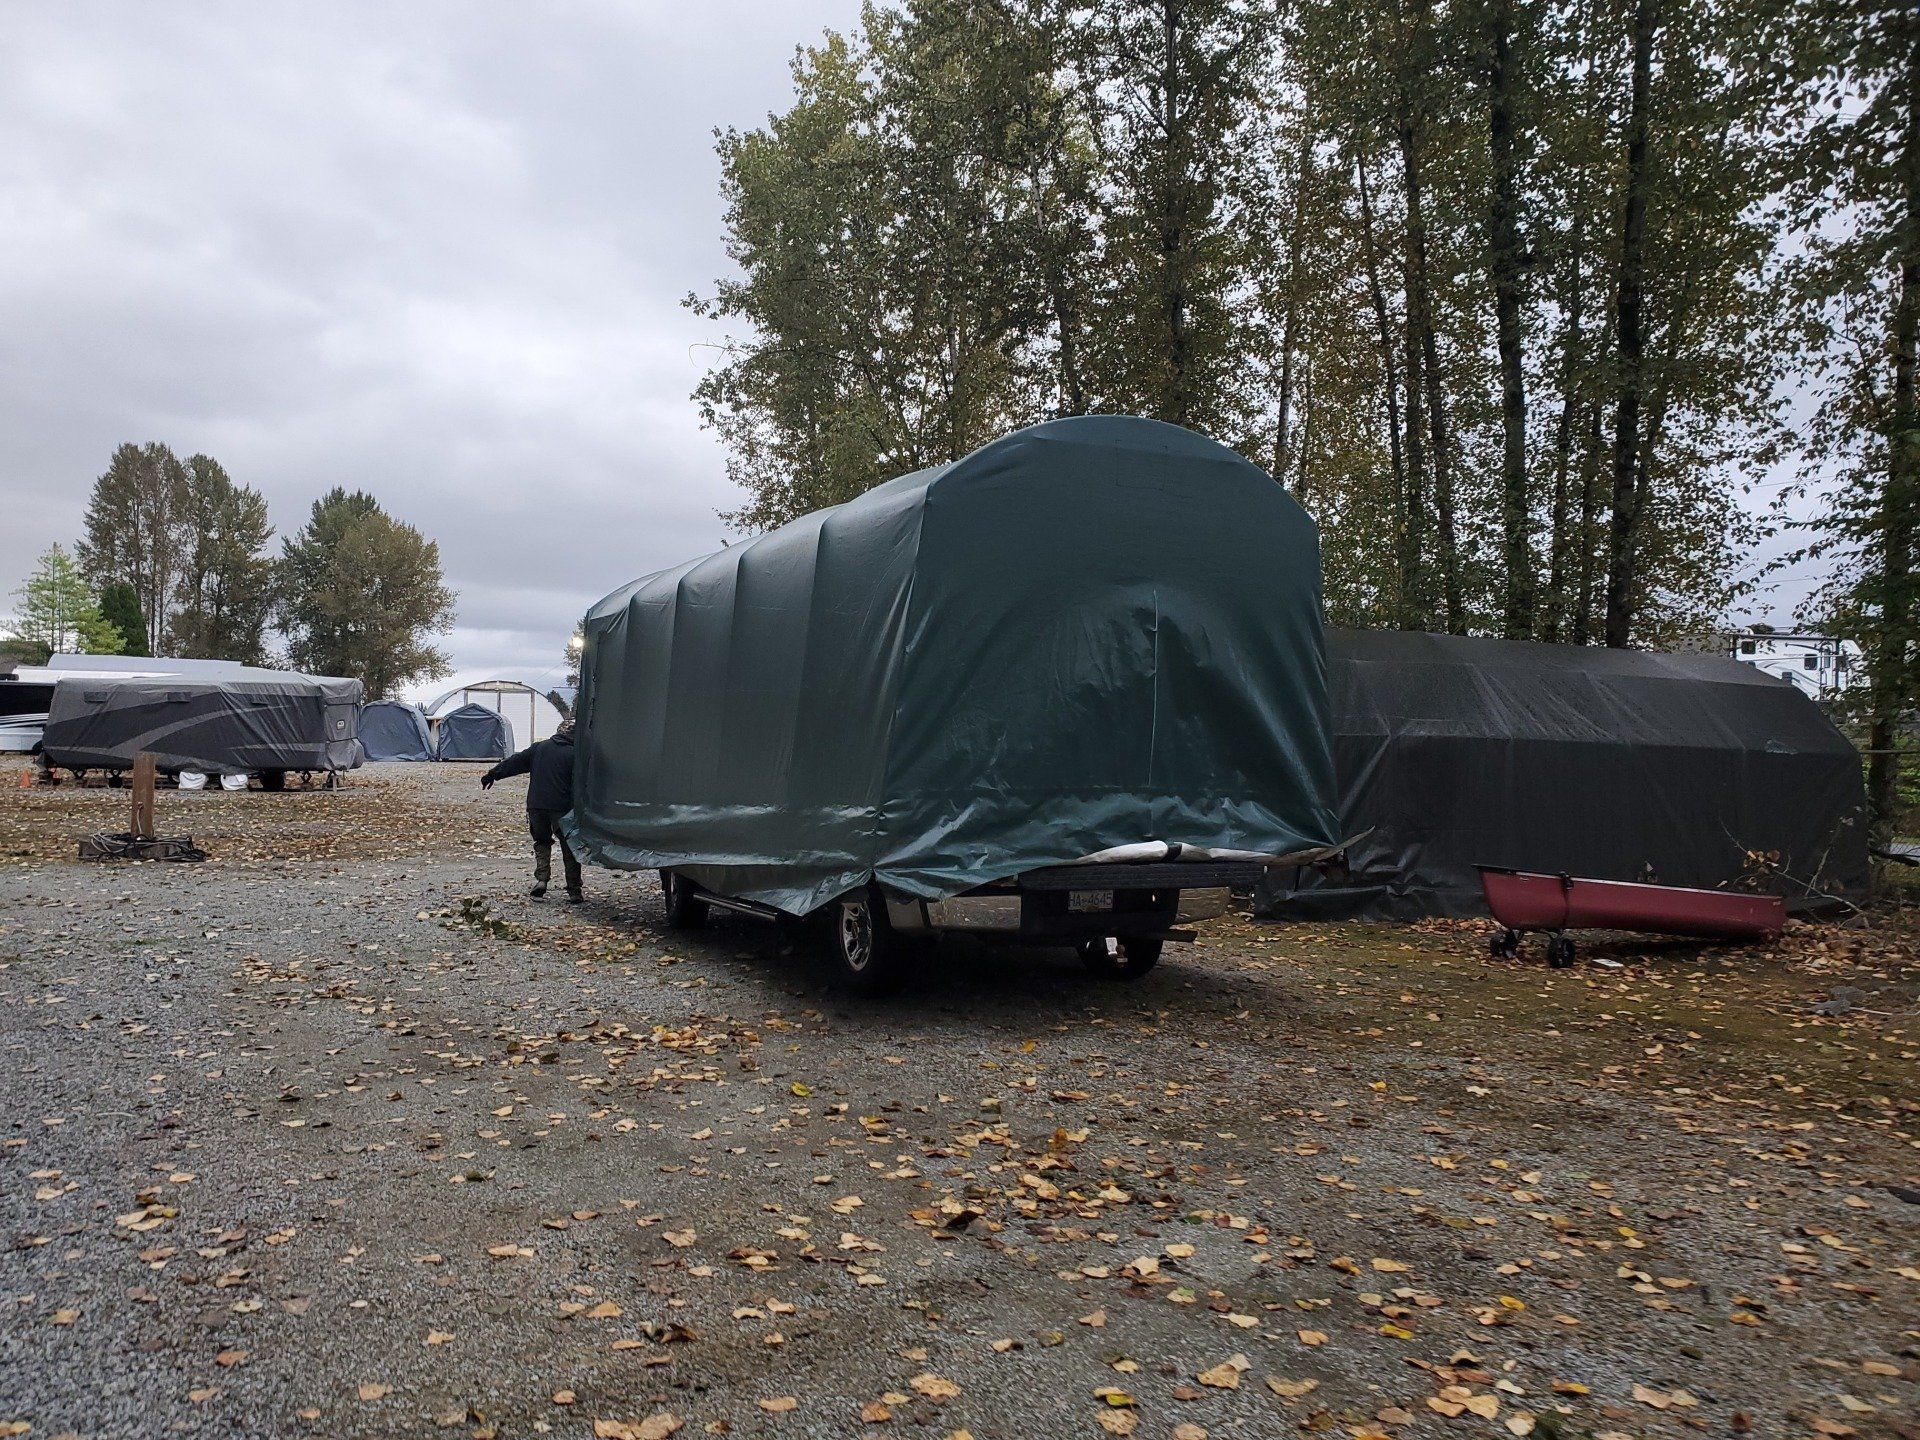 cover-tech reviews pic showing portable car shelter being moved